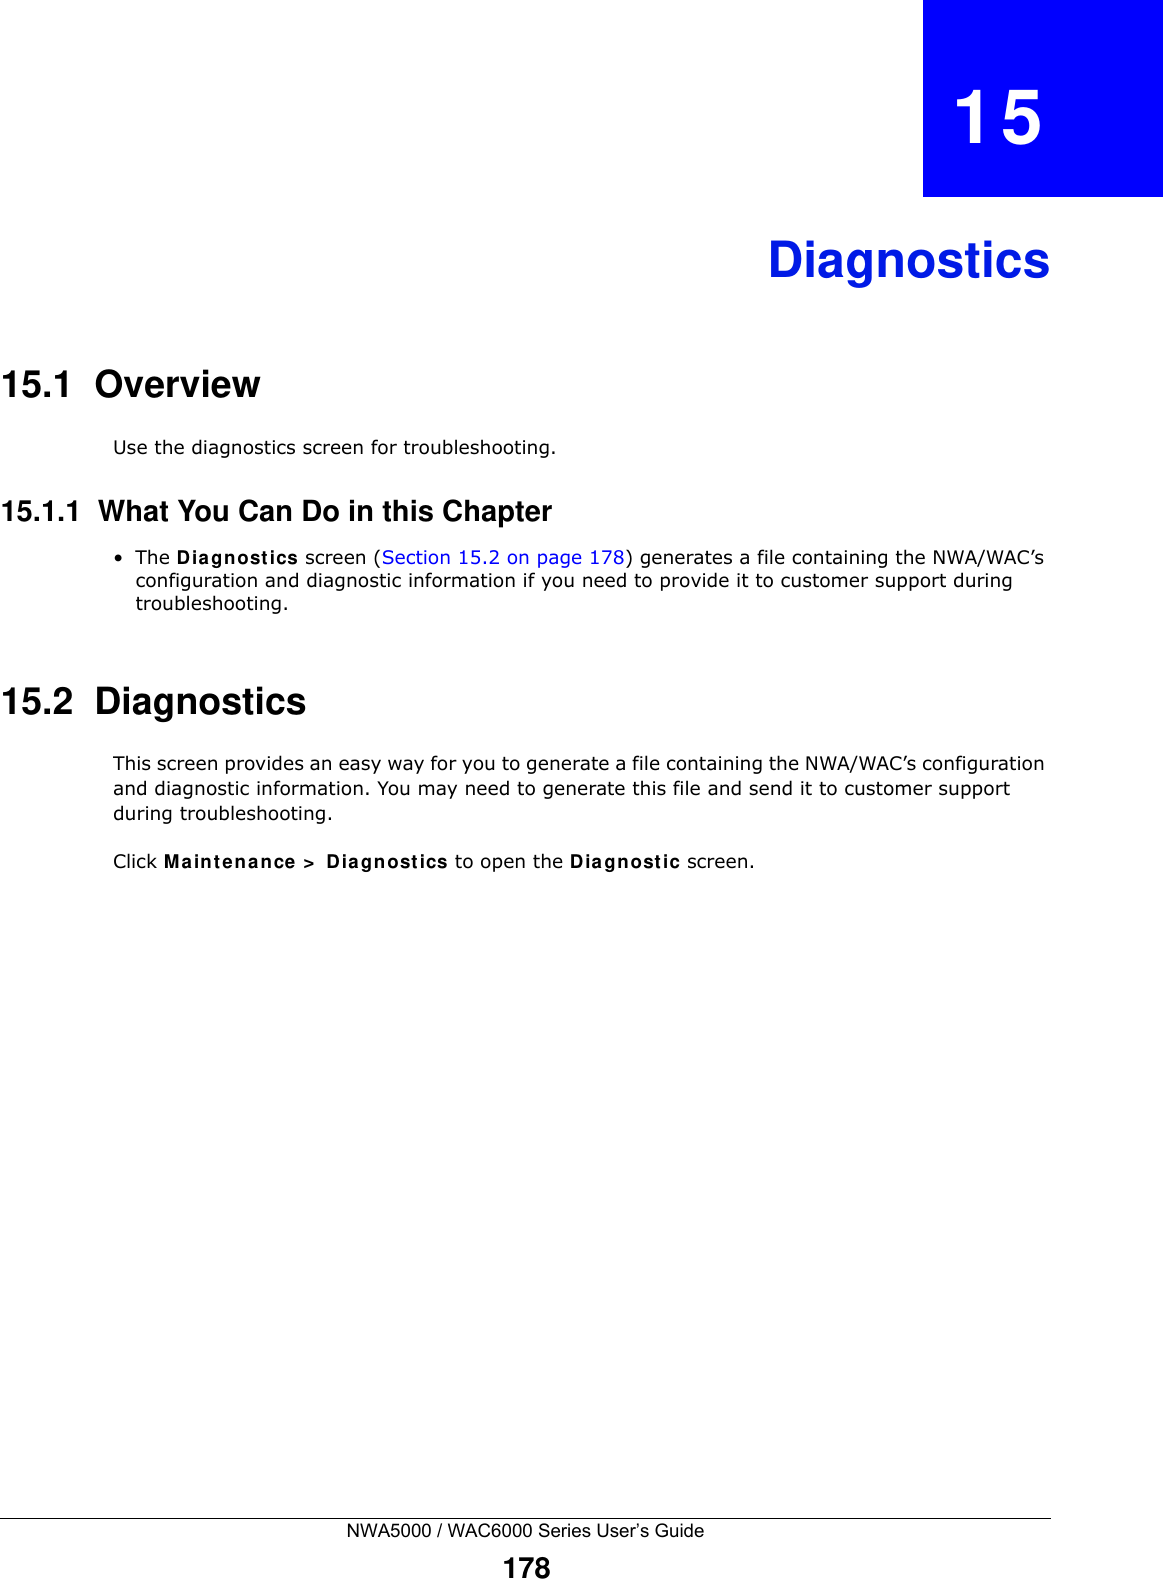 NWA5000 / WAC6000 Series User’s Guide178CHAPTER   15Diagnostics15.1  OverviewUse the diagnostics screen for troubleshooting. 15.1.1  What You Can Do in this Chapter•The D ia gnost ics screen (Section 15.2 on page 178) generates a file containing the NWA/WAC’s configuration and diagnostic information if you need to provide it to customer support during troubleshooting.15.2  Diagnostics This screen provides an easy way for you to generate a file containing the NWA/WAC’s configuration and diagnostic information. You may need to generate this file and send it to customer support during troubleshooting.Click M ainte nan ce  &gt;  Diagnost ics to open the Diagnost ic screen. 